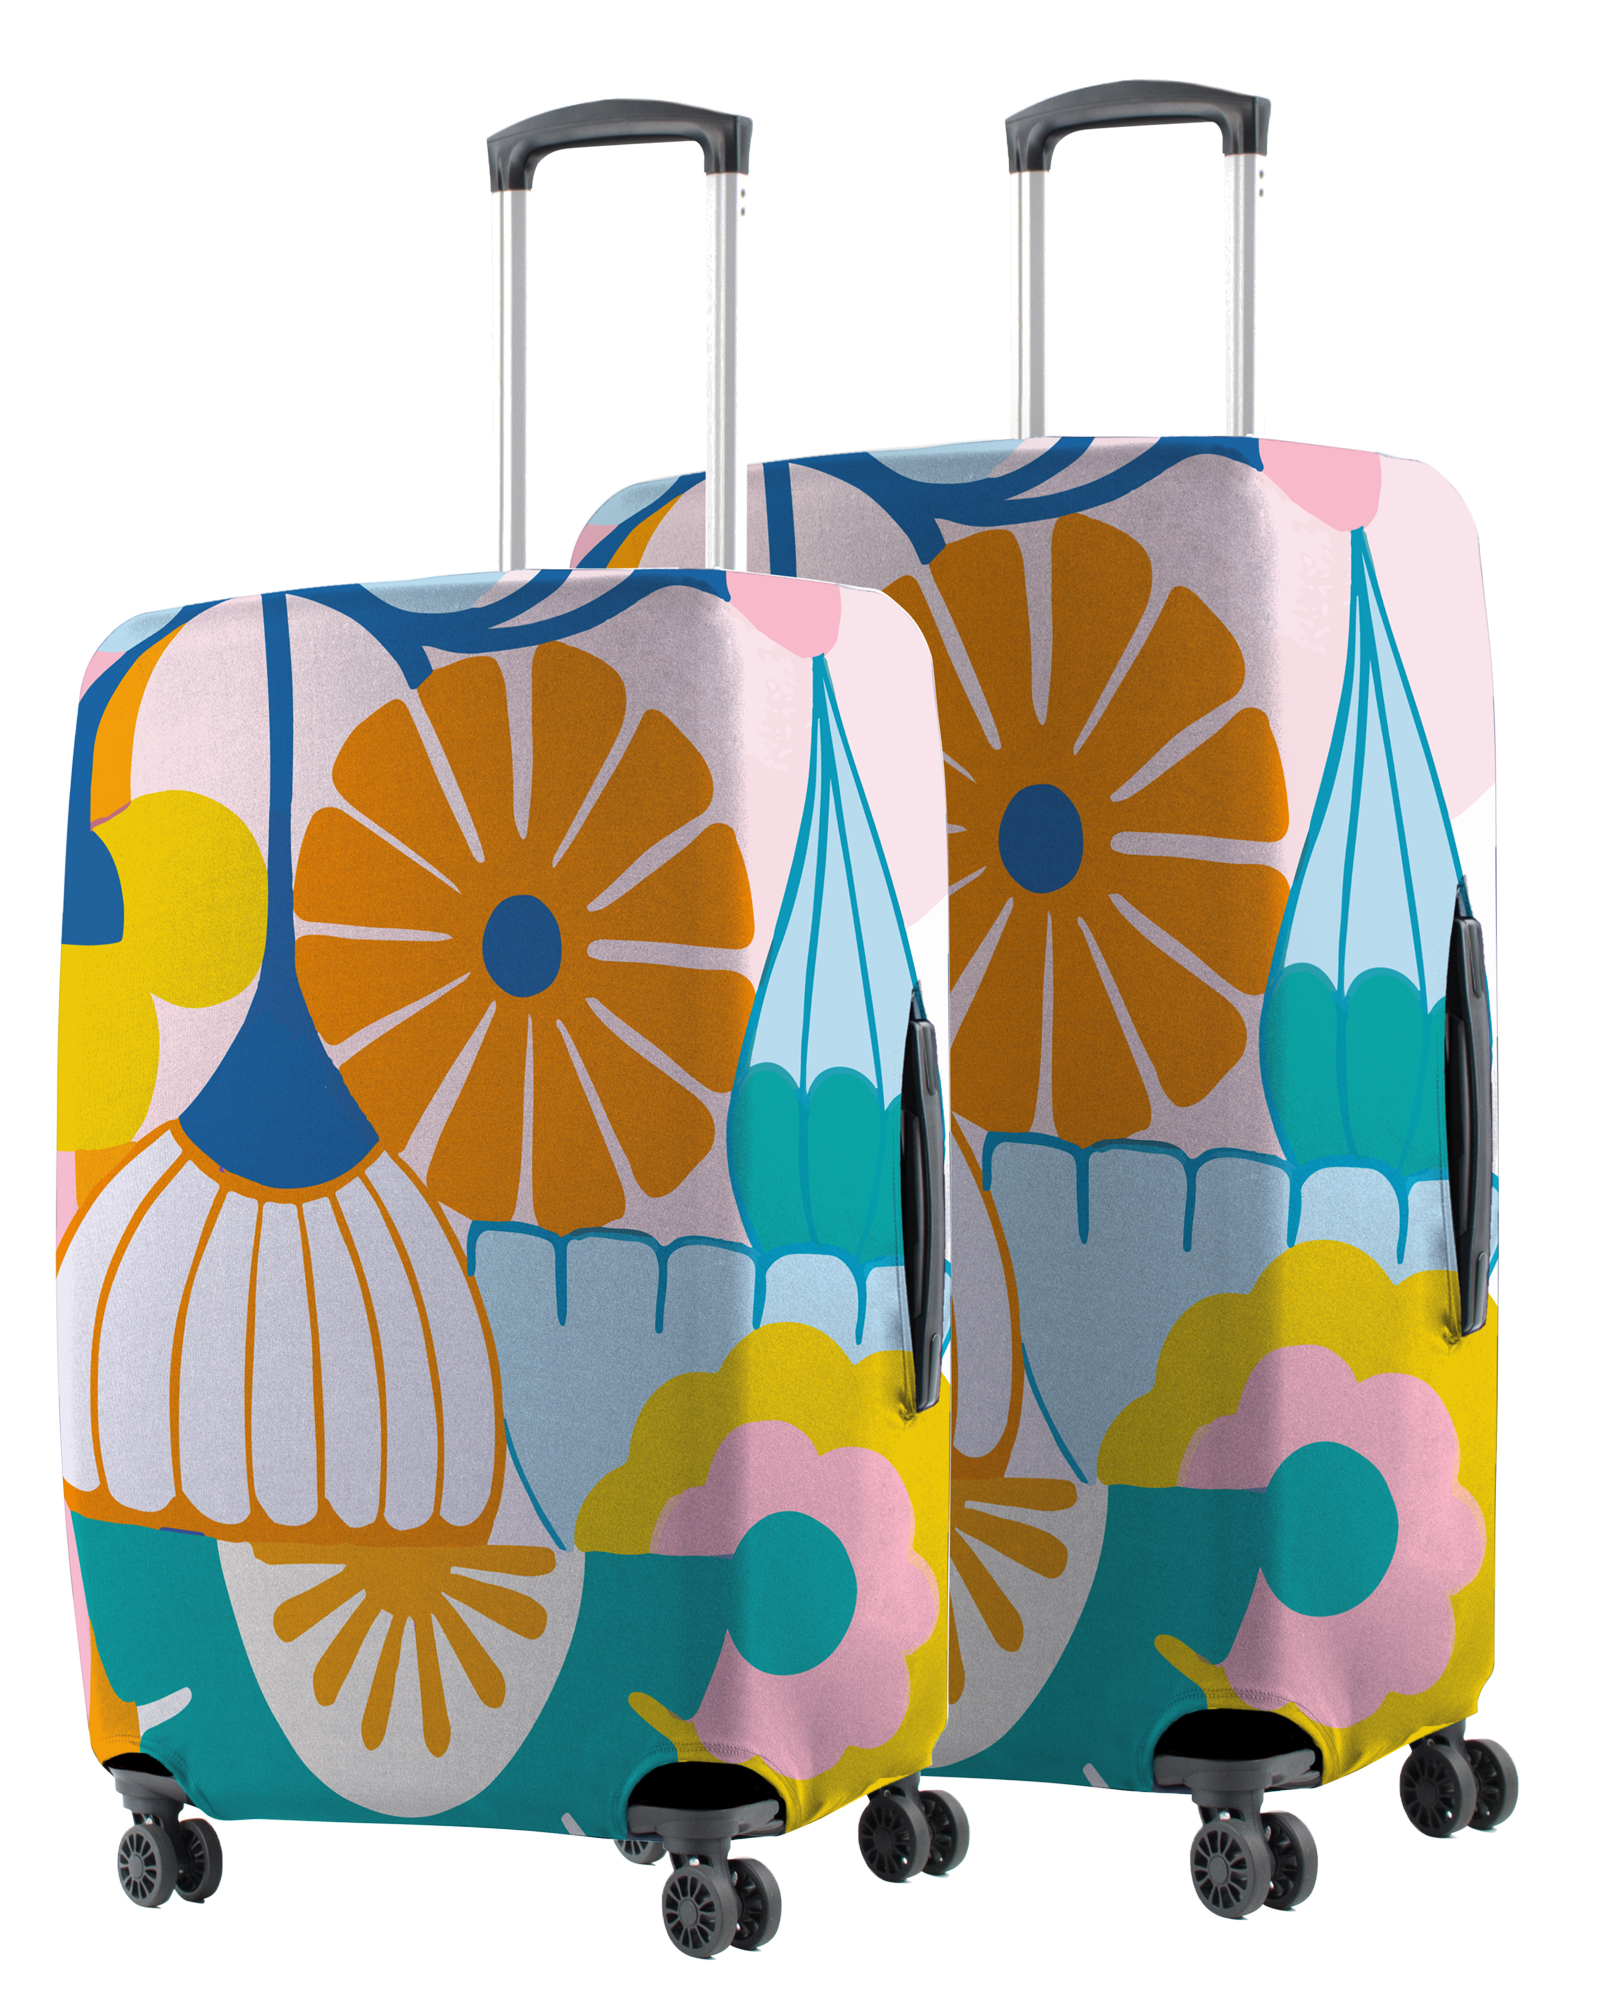 Luggage Cover Pink Beach Design